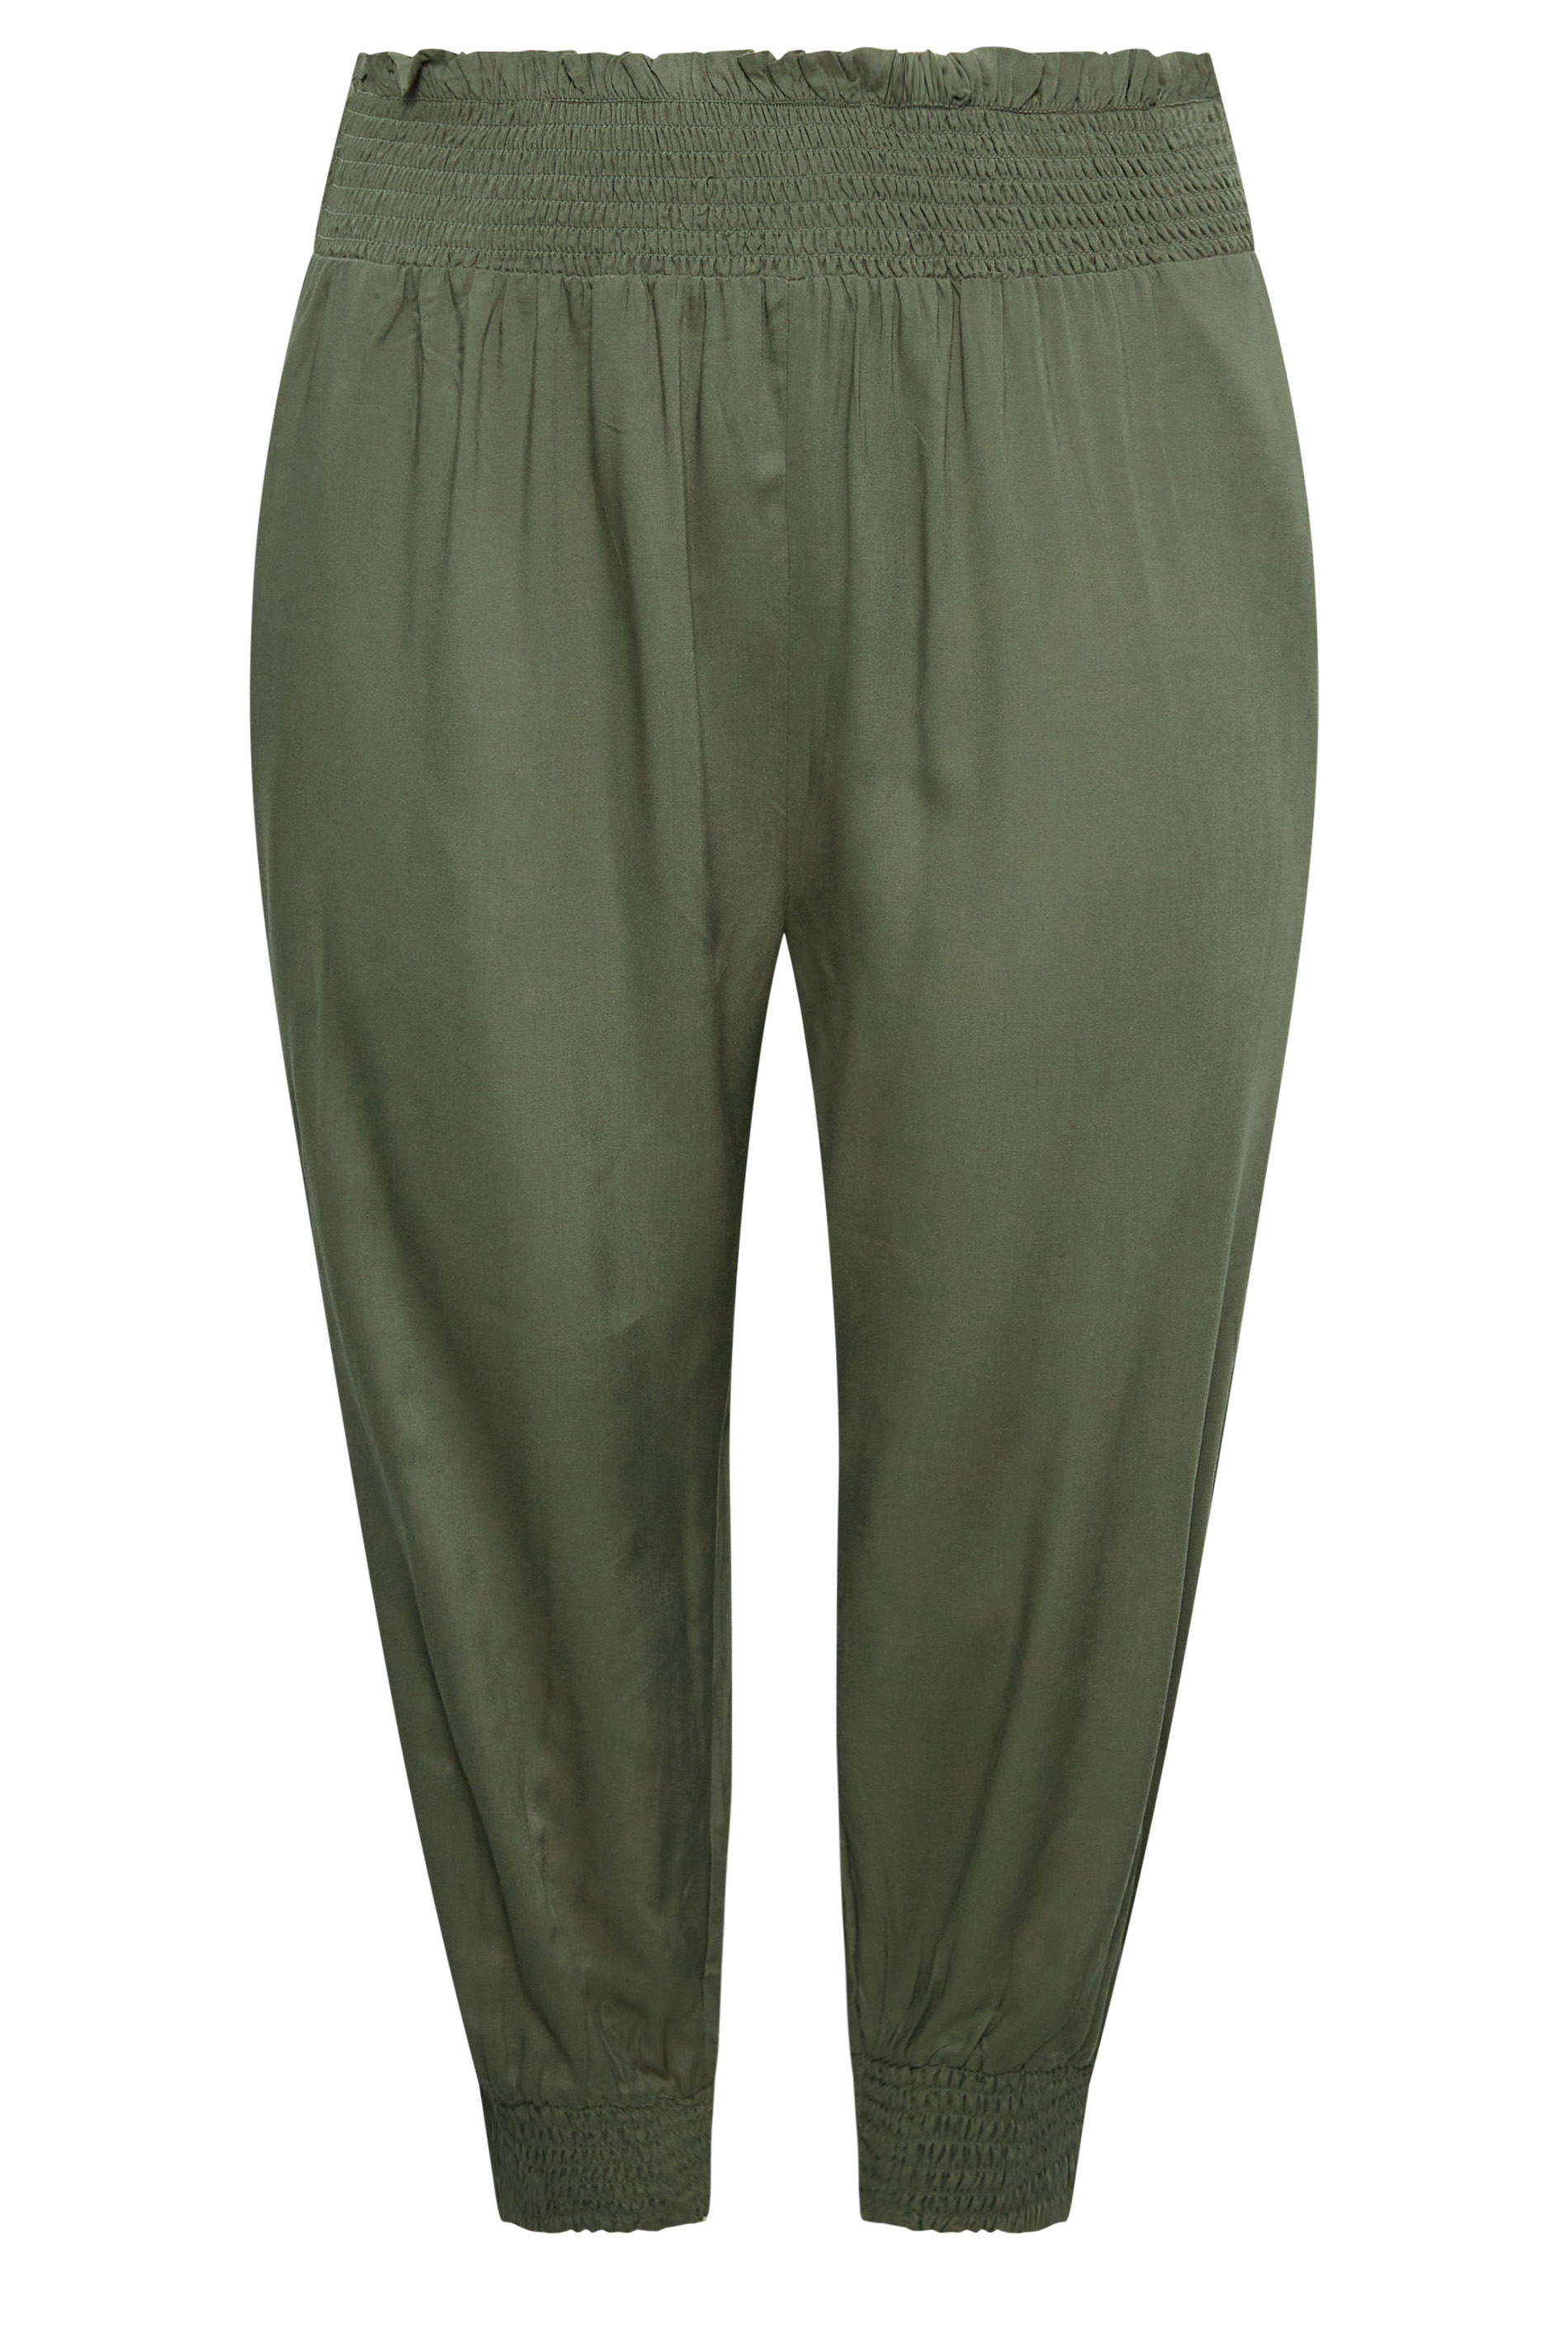 YOURS Curve Khaki Green Shirred Waist Cropped Harem Trousers | Yours ...